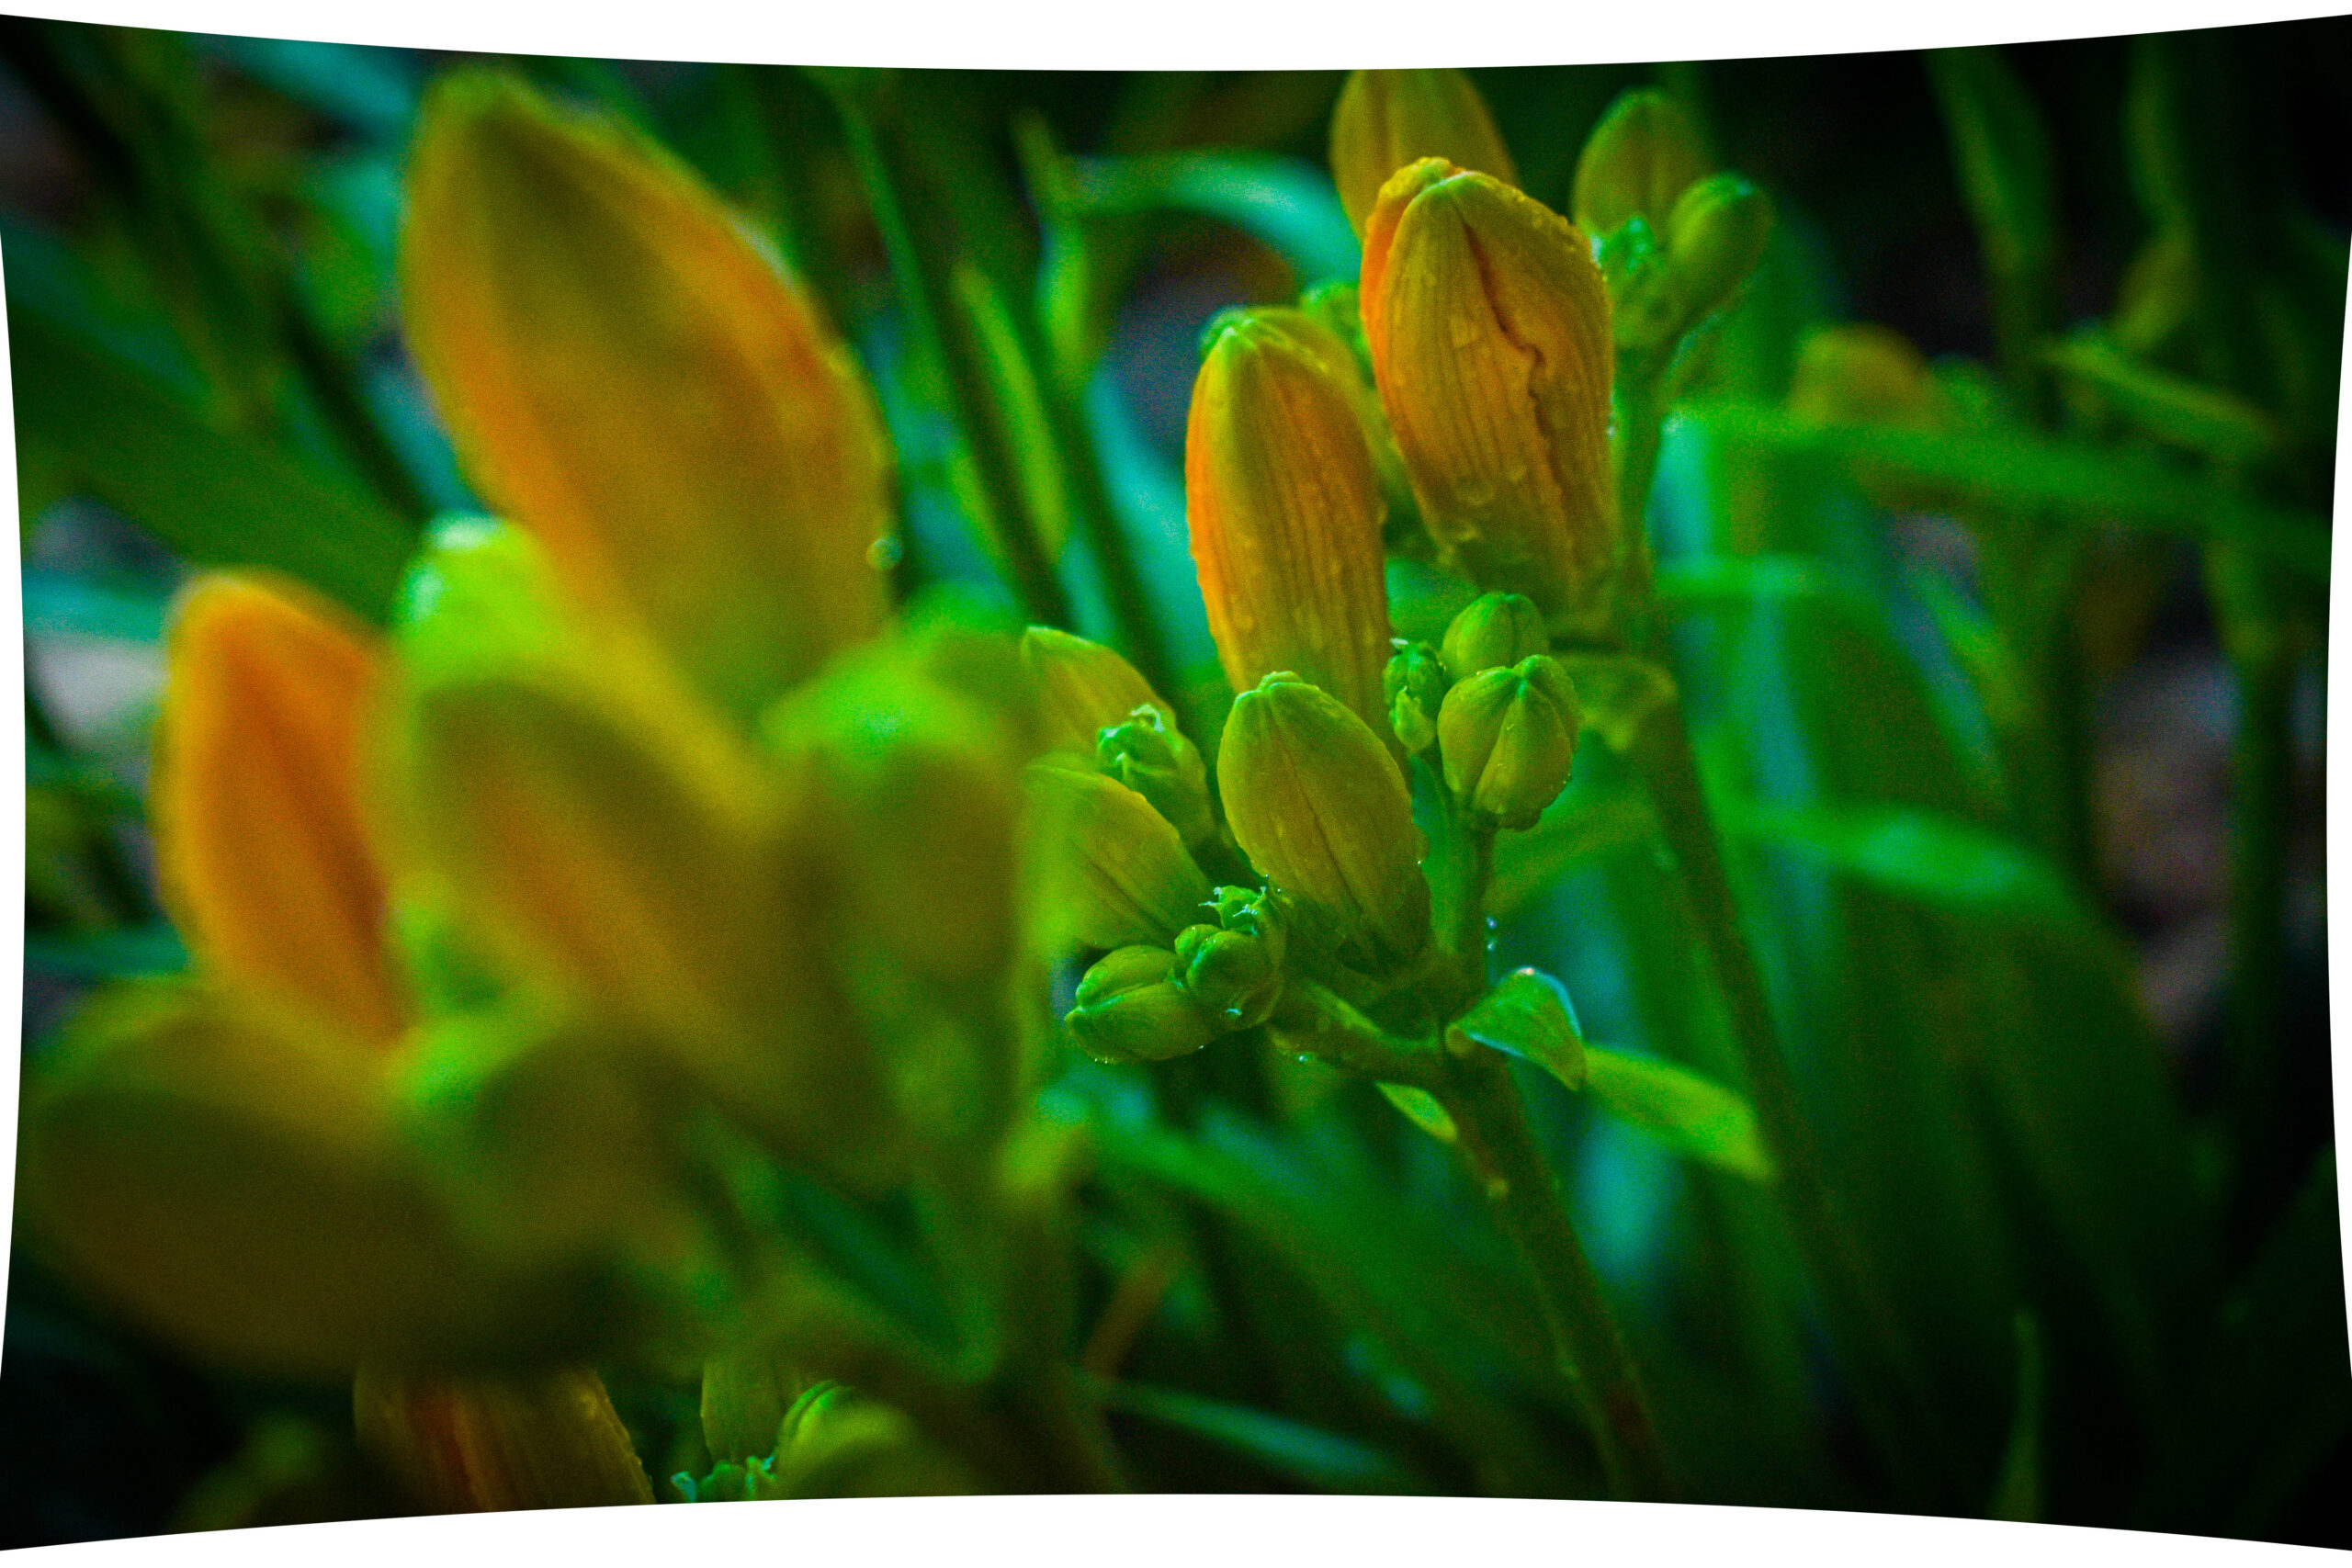 Green stems and buds of pink salmon color asiatic day lily flowers in a dreamy fog setting after a misty summer rain